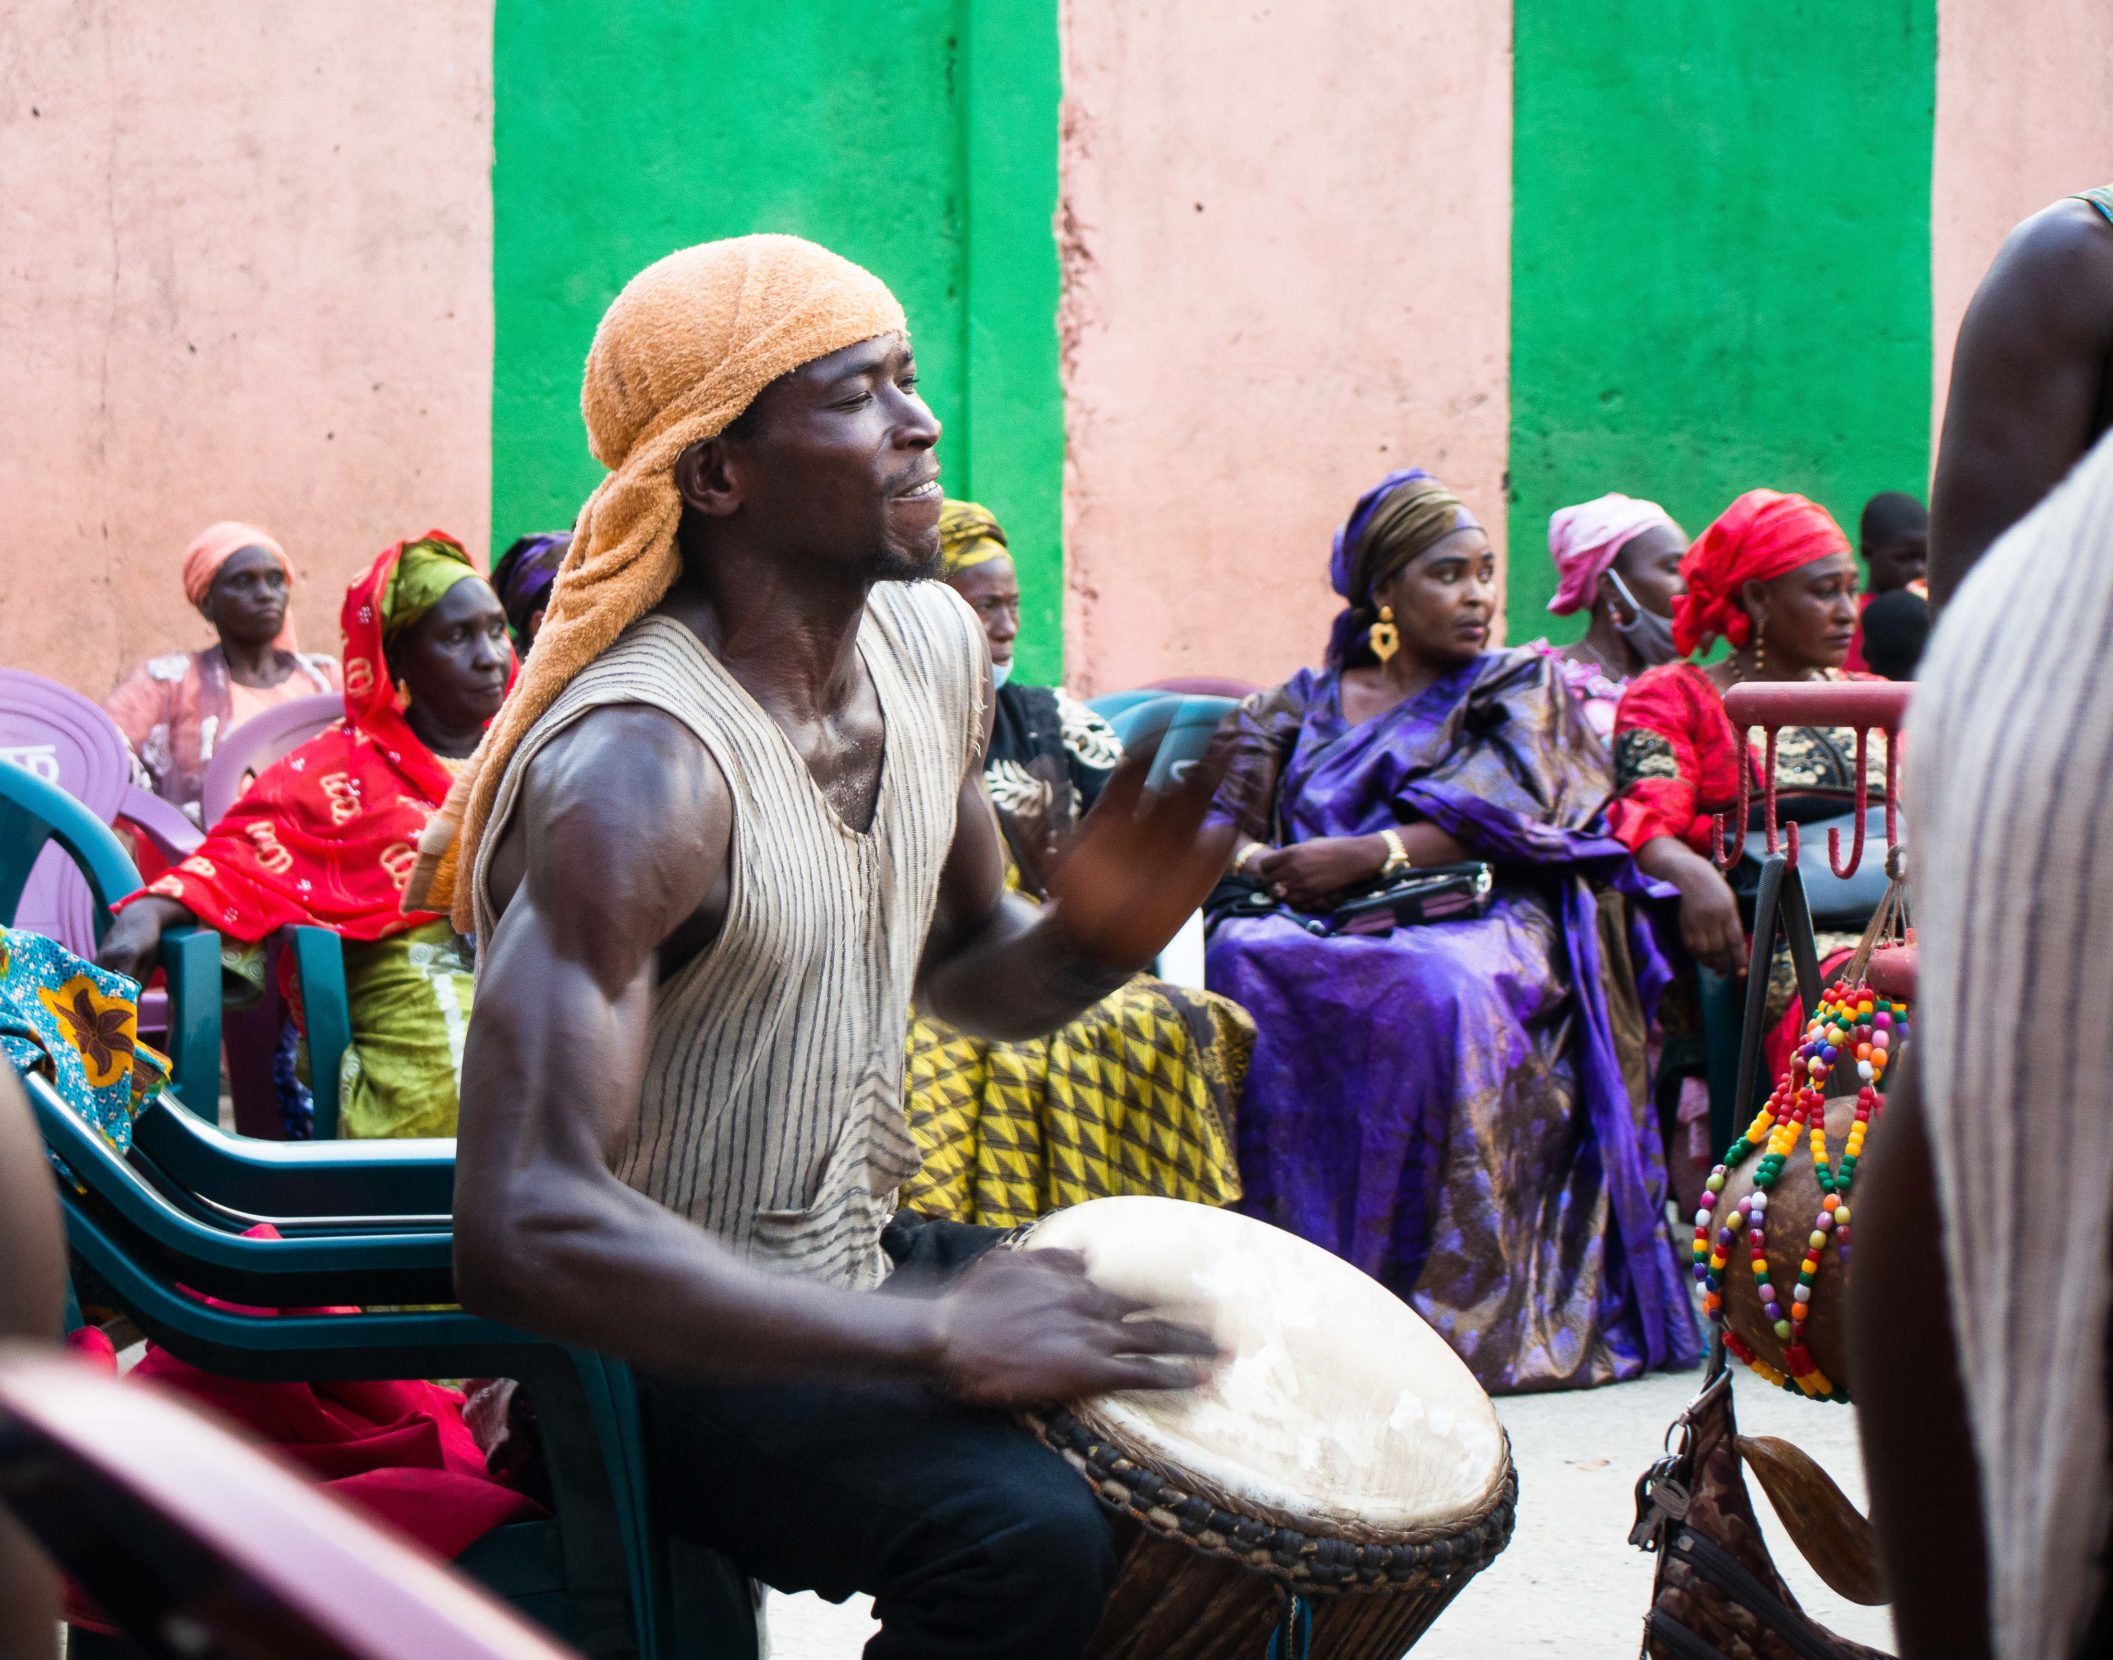 Drummer Mamoudou Keita plays the djembe at a traditional pre-wedding ceremony in Conakry, Guinea. His father performed as a soloist of Les Ballets Africains. Photo: Aki Natori.